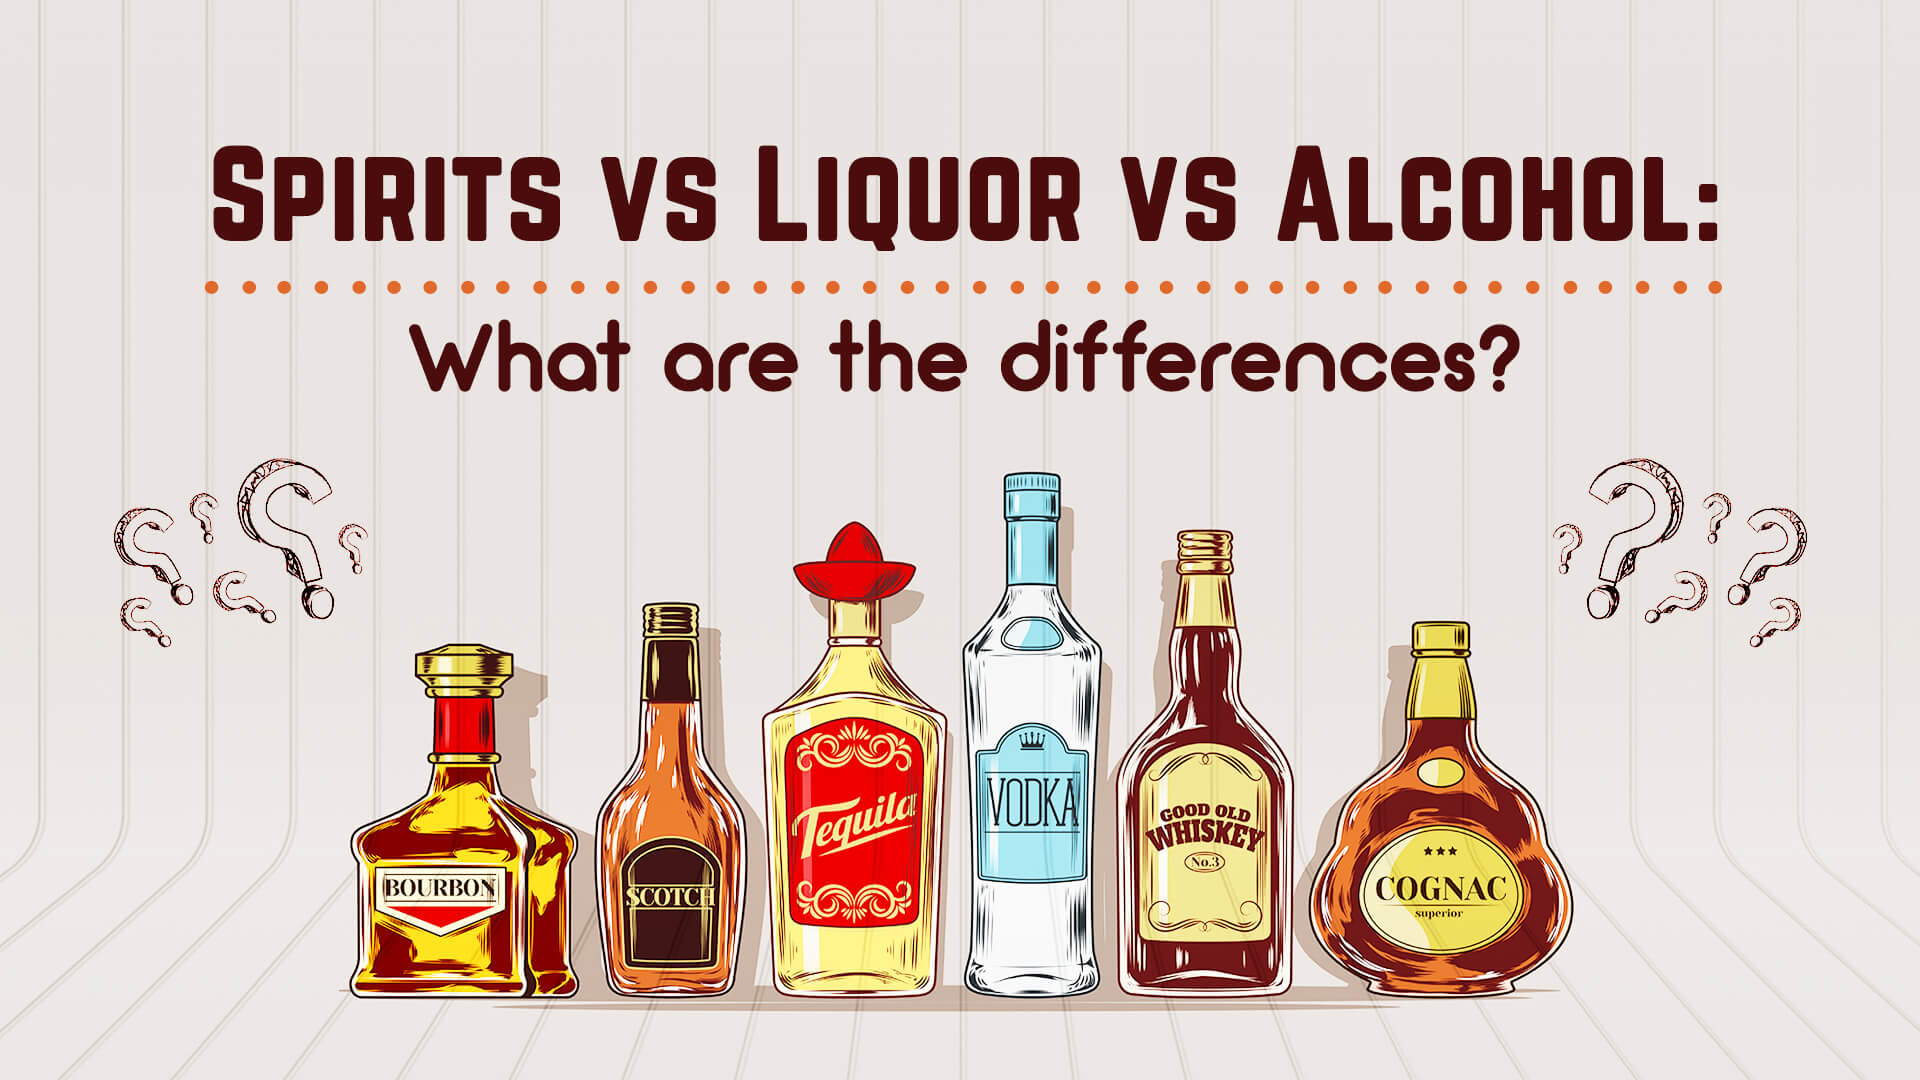 Spirits vs Liquor vs Alcohol: What are the differences?